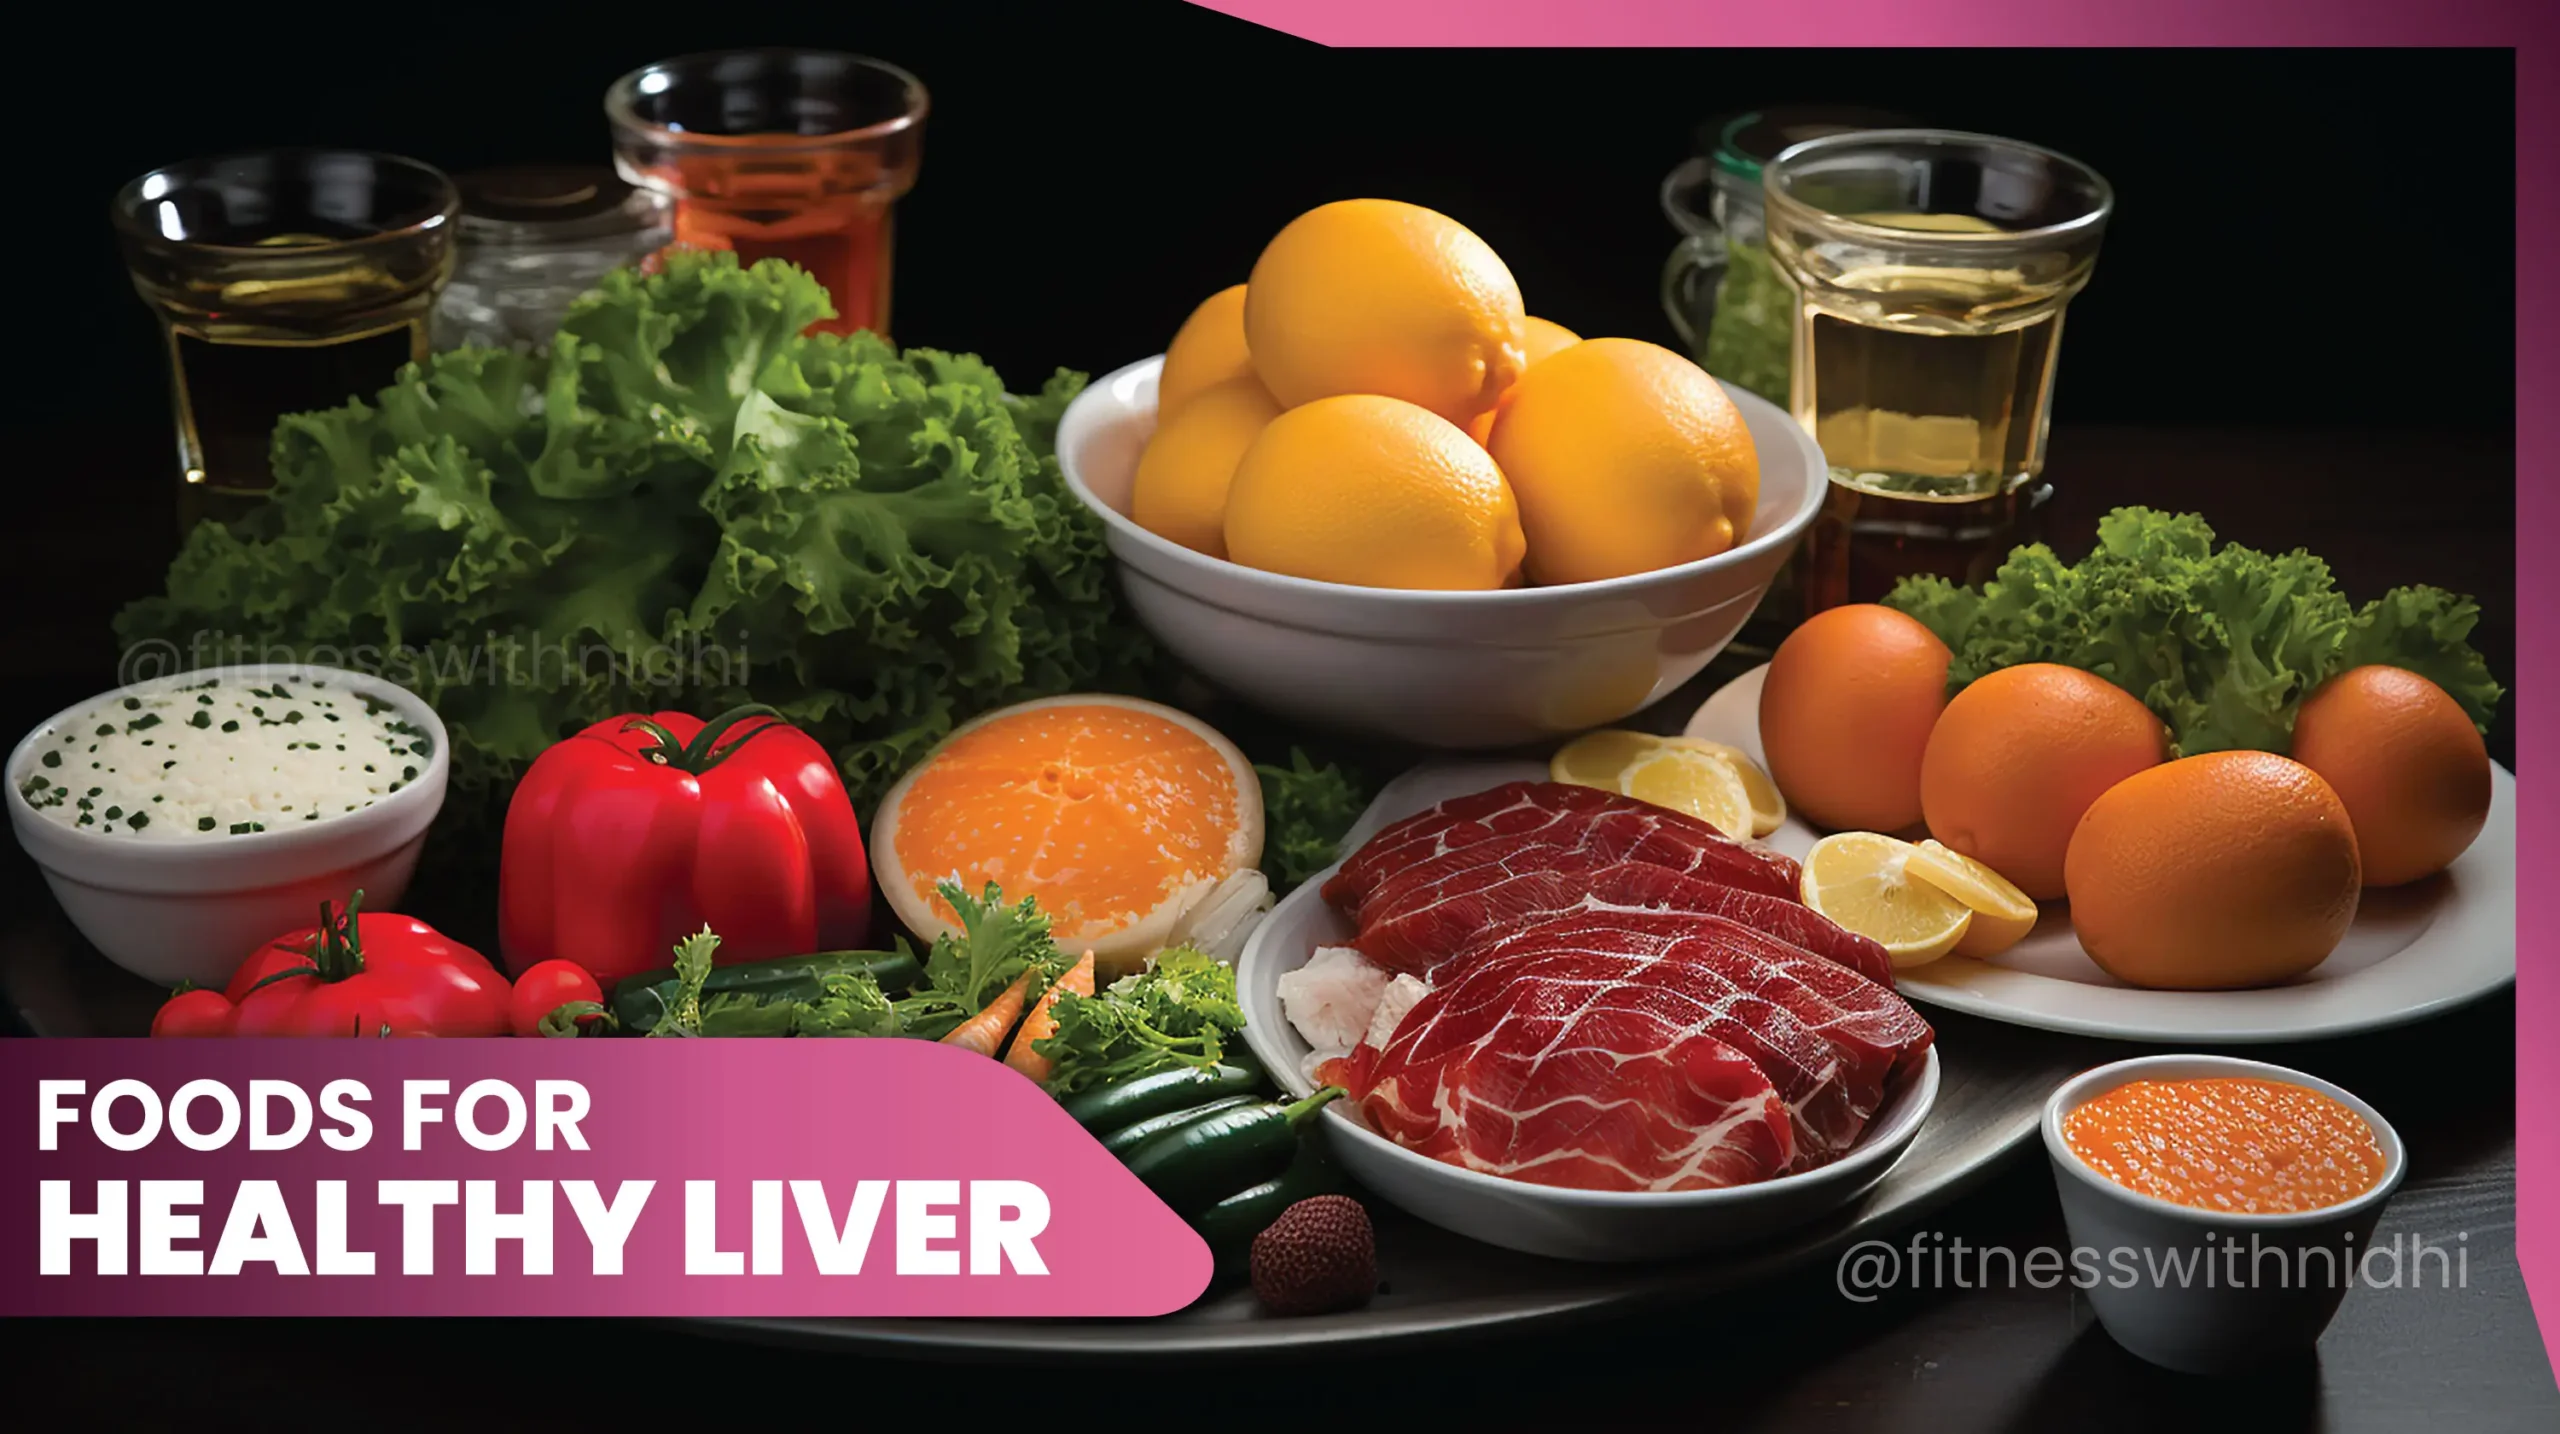 11Diet foods for healthy liver